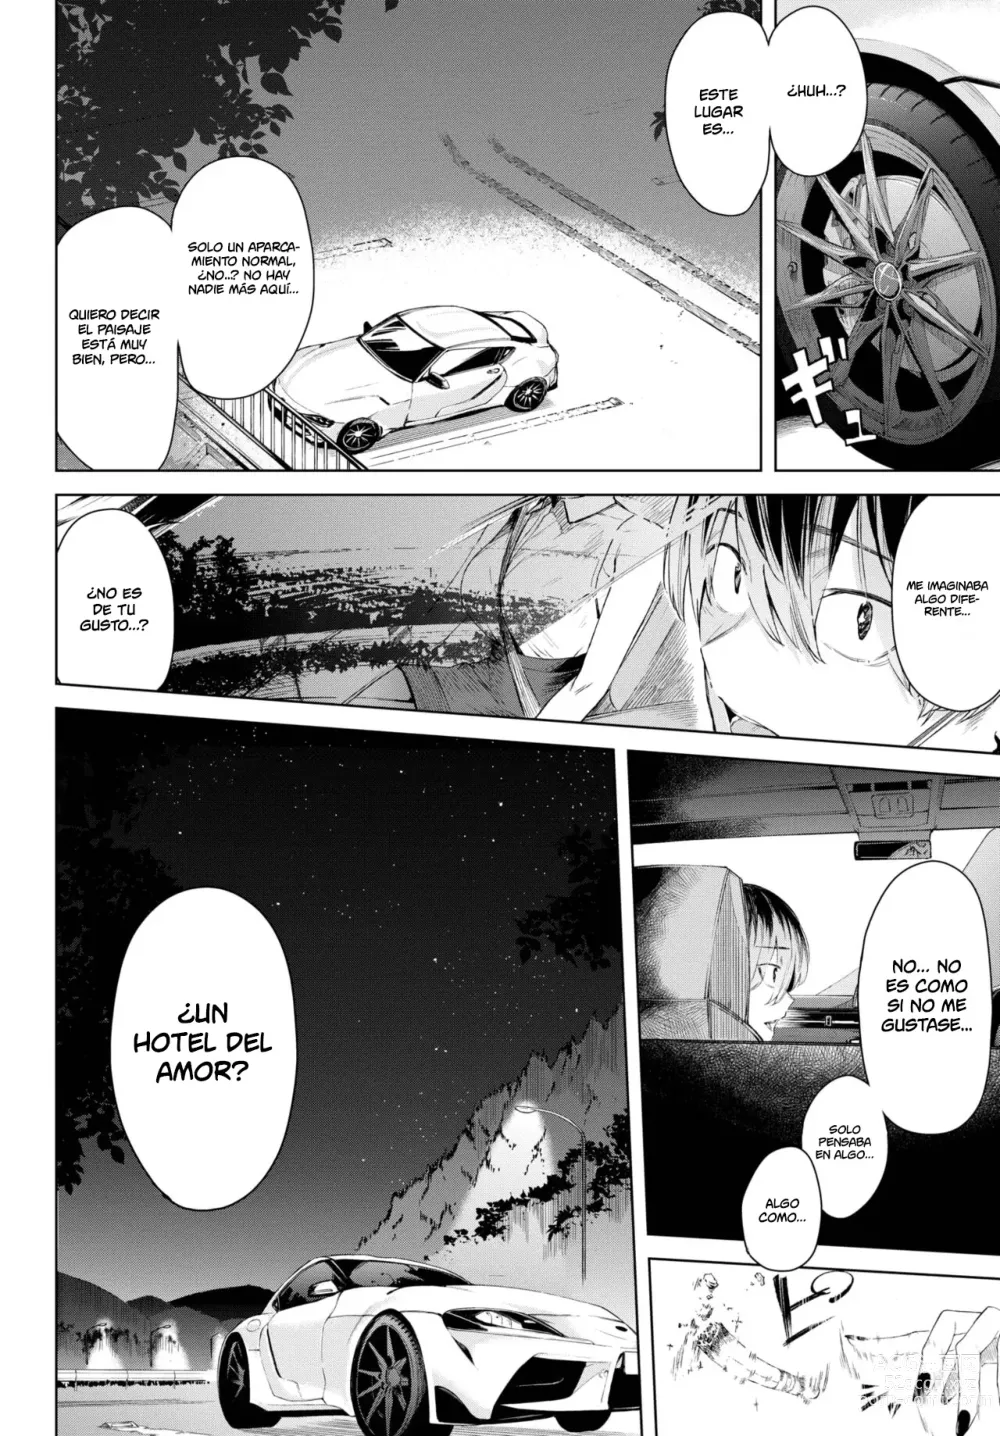 Page 4 of manga Guardrail o Tobikoete - Jump over the Guardrail